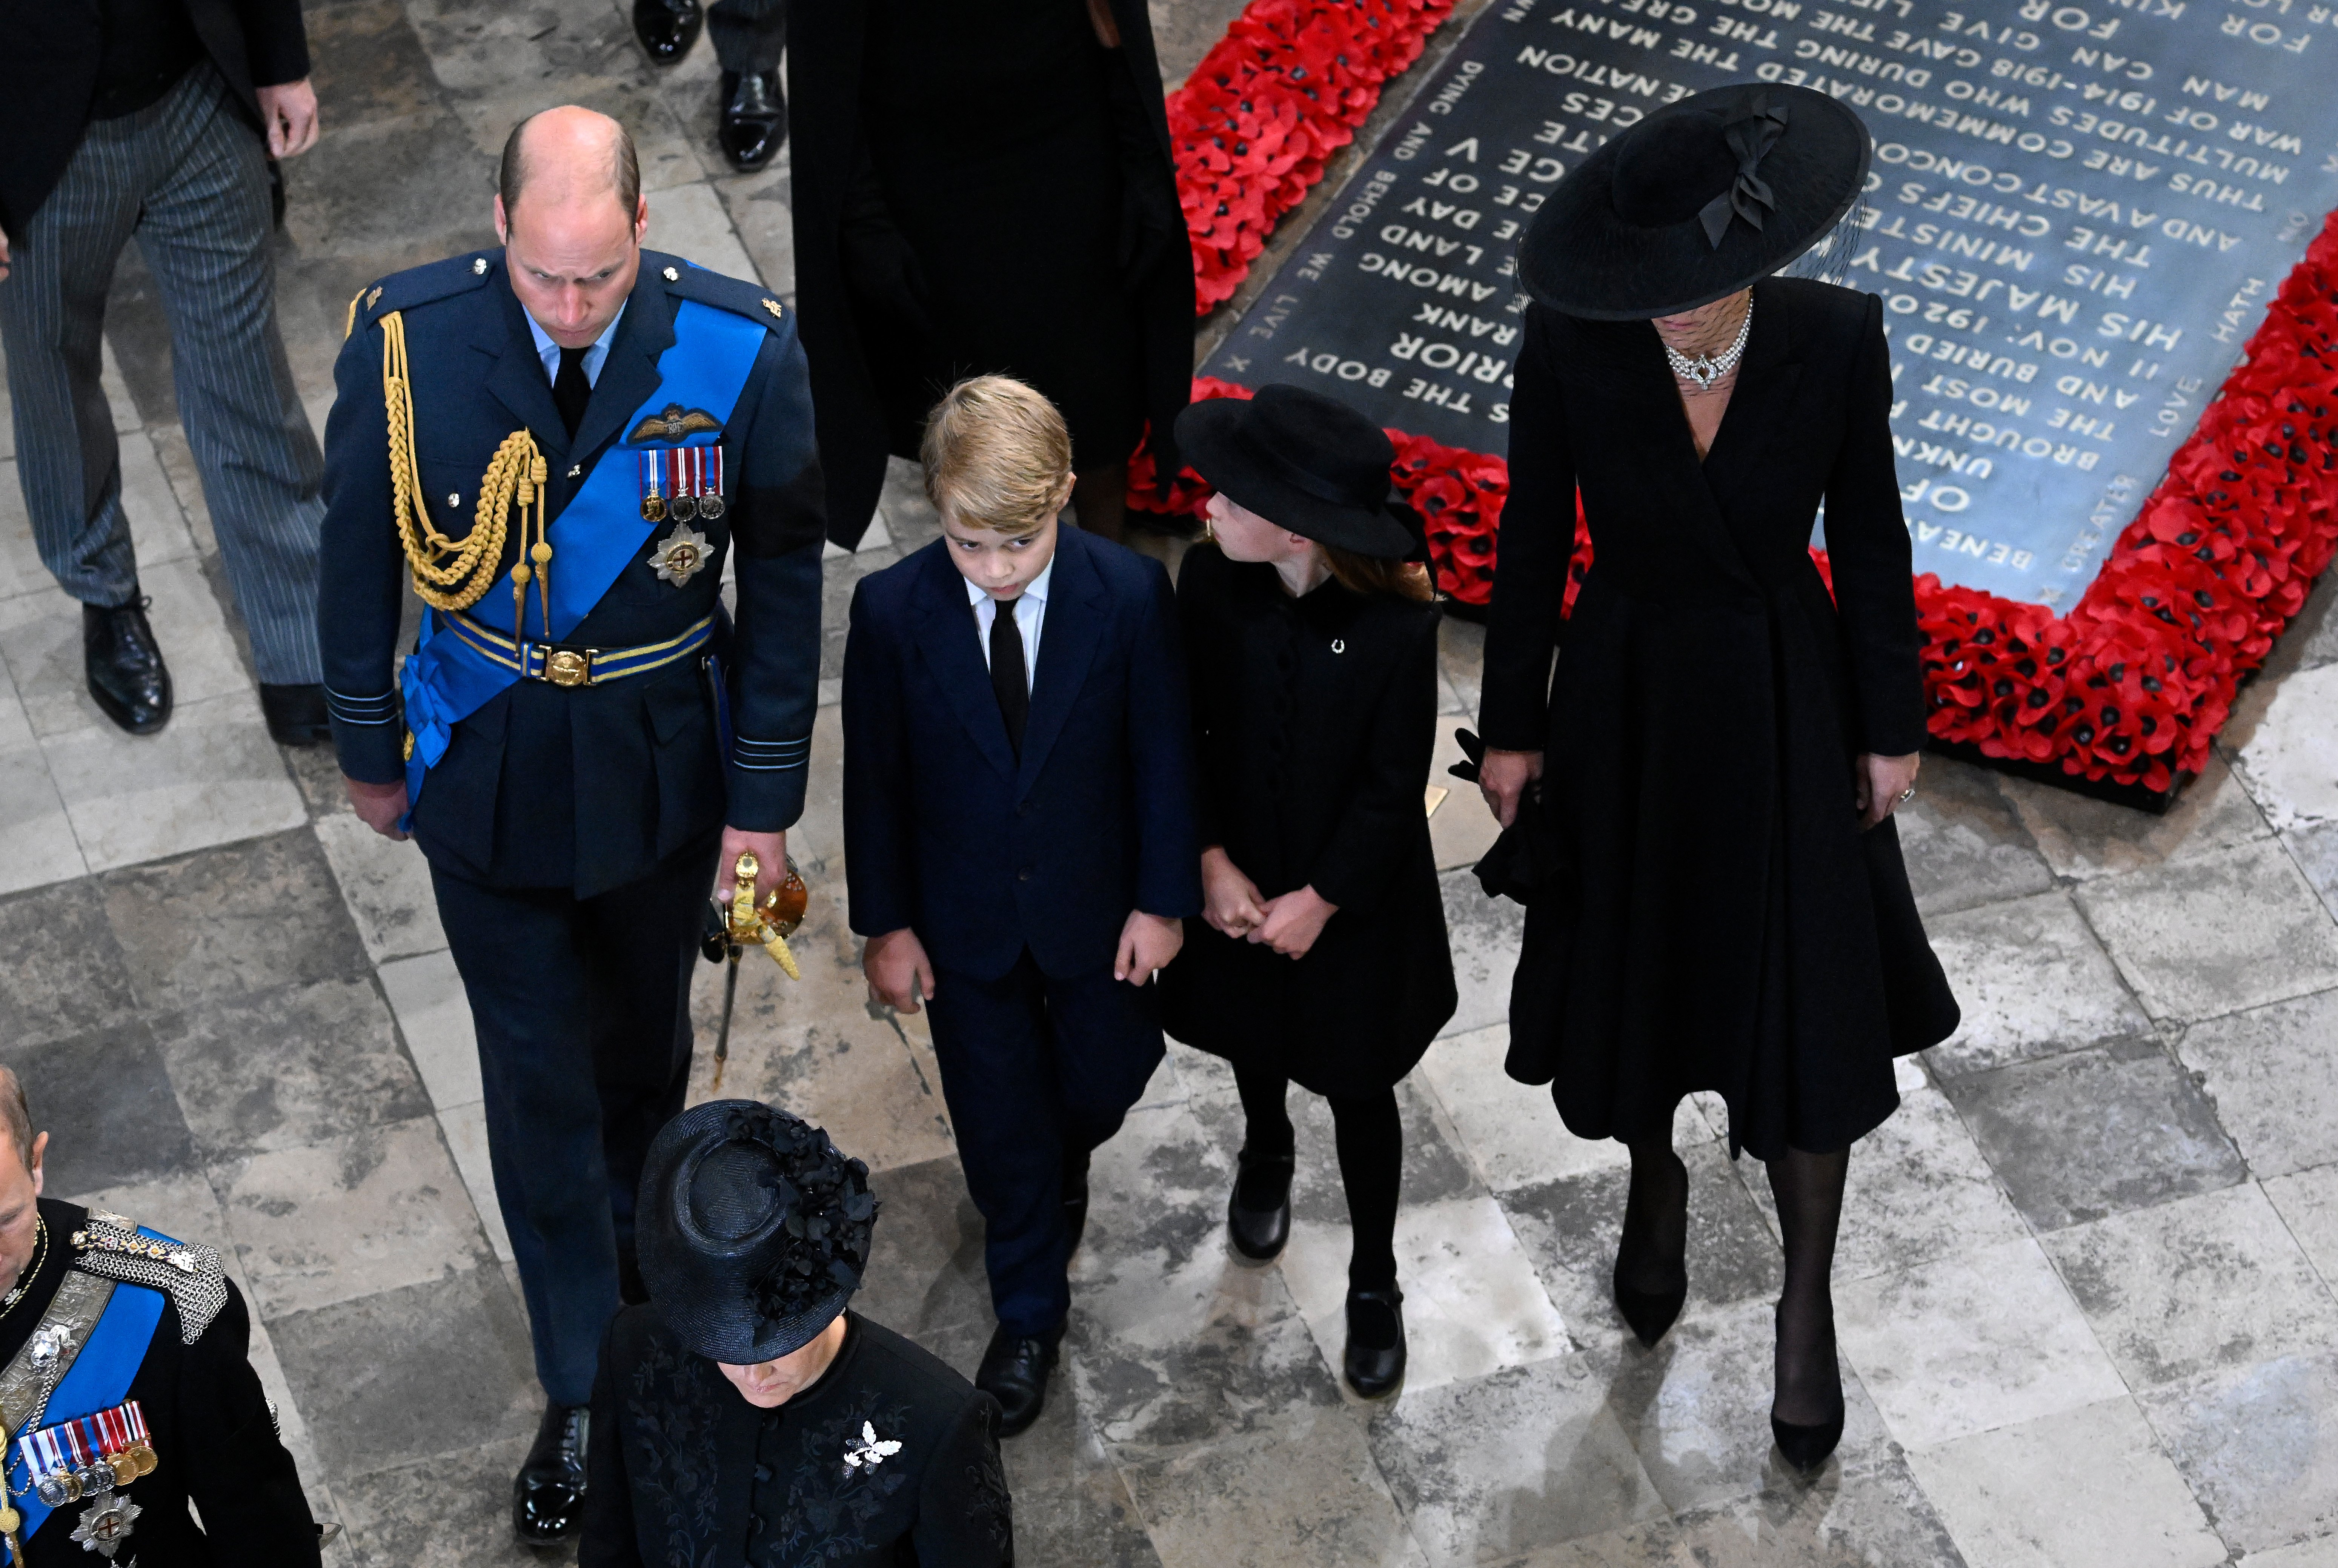 Prince William, Prince George, Princess Charlotte, and Princess Kate depart Westminster Abbey during the State Funeral of Queen Elizabeth II on September 19, 2022, in London, England | Source: Getty Images